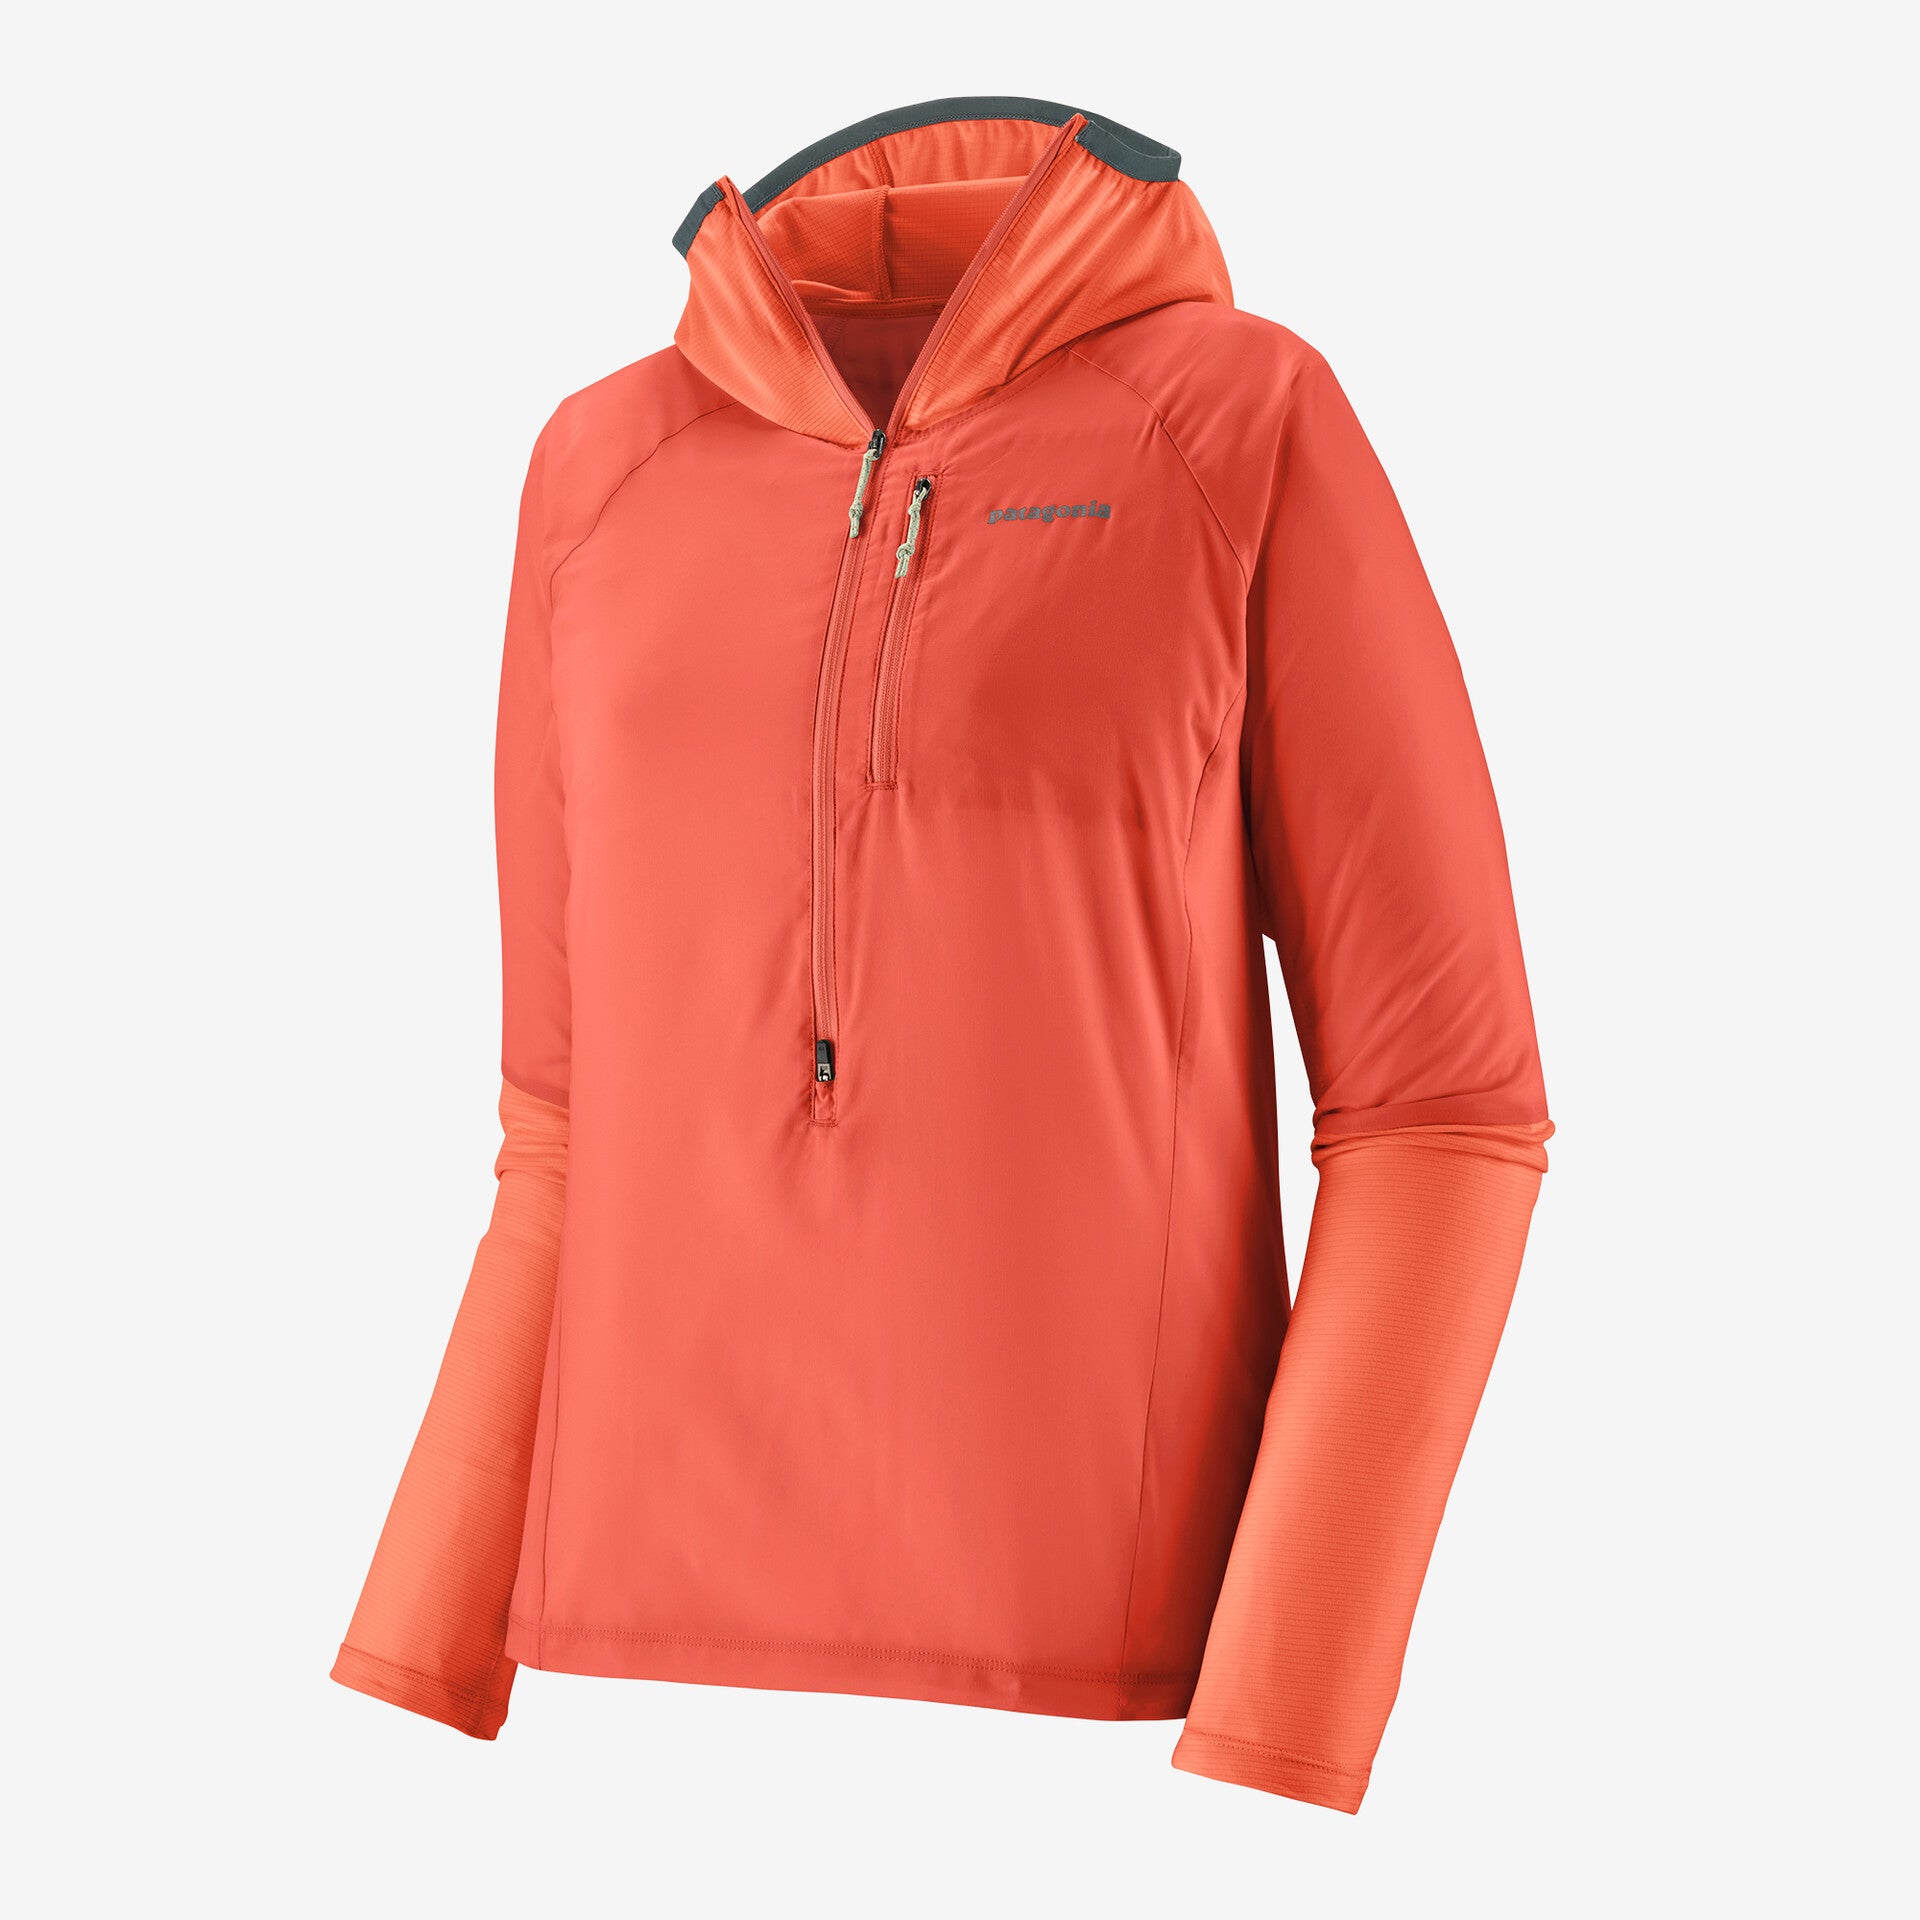 PATAGONIA WOMEN'S AIRSHED PRO PULLOVER - COHC COHO CORAL XS